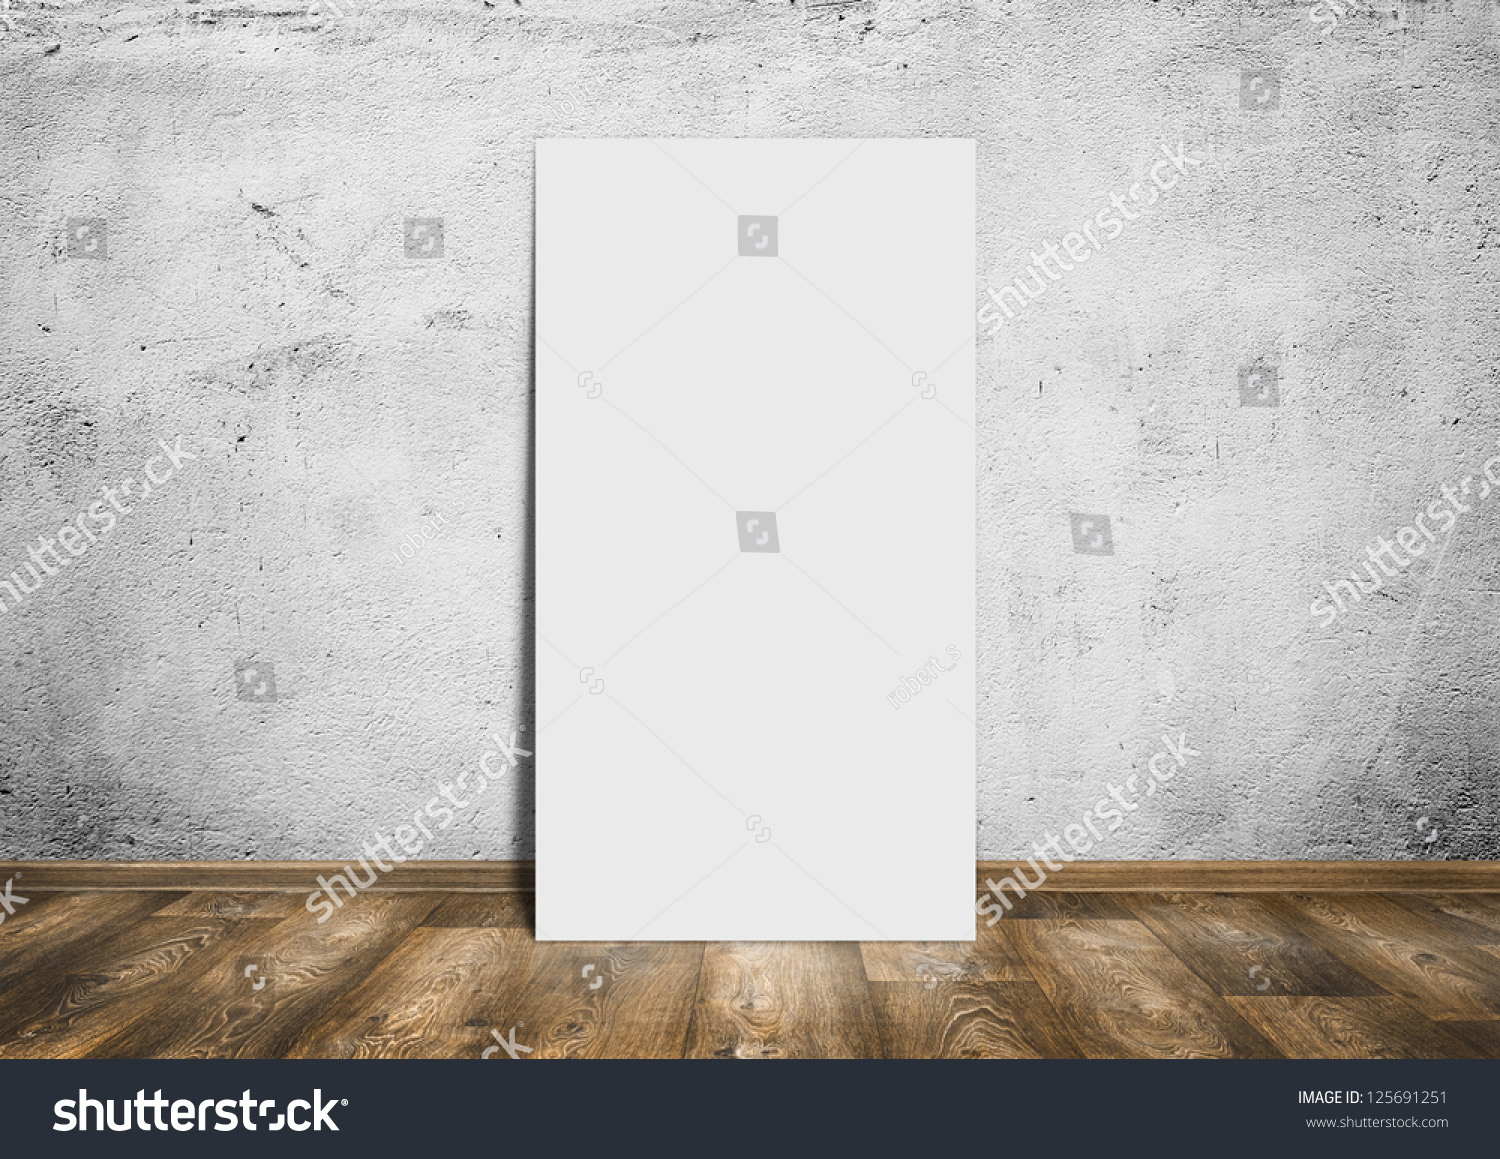 room interior vintage wall, wood floor and white blank placard background #125691251